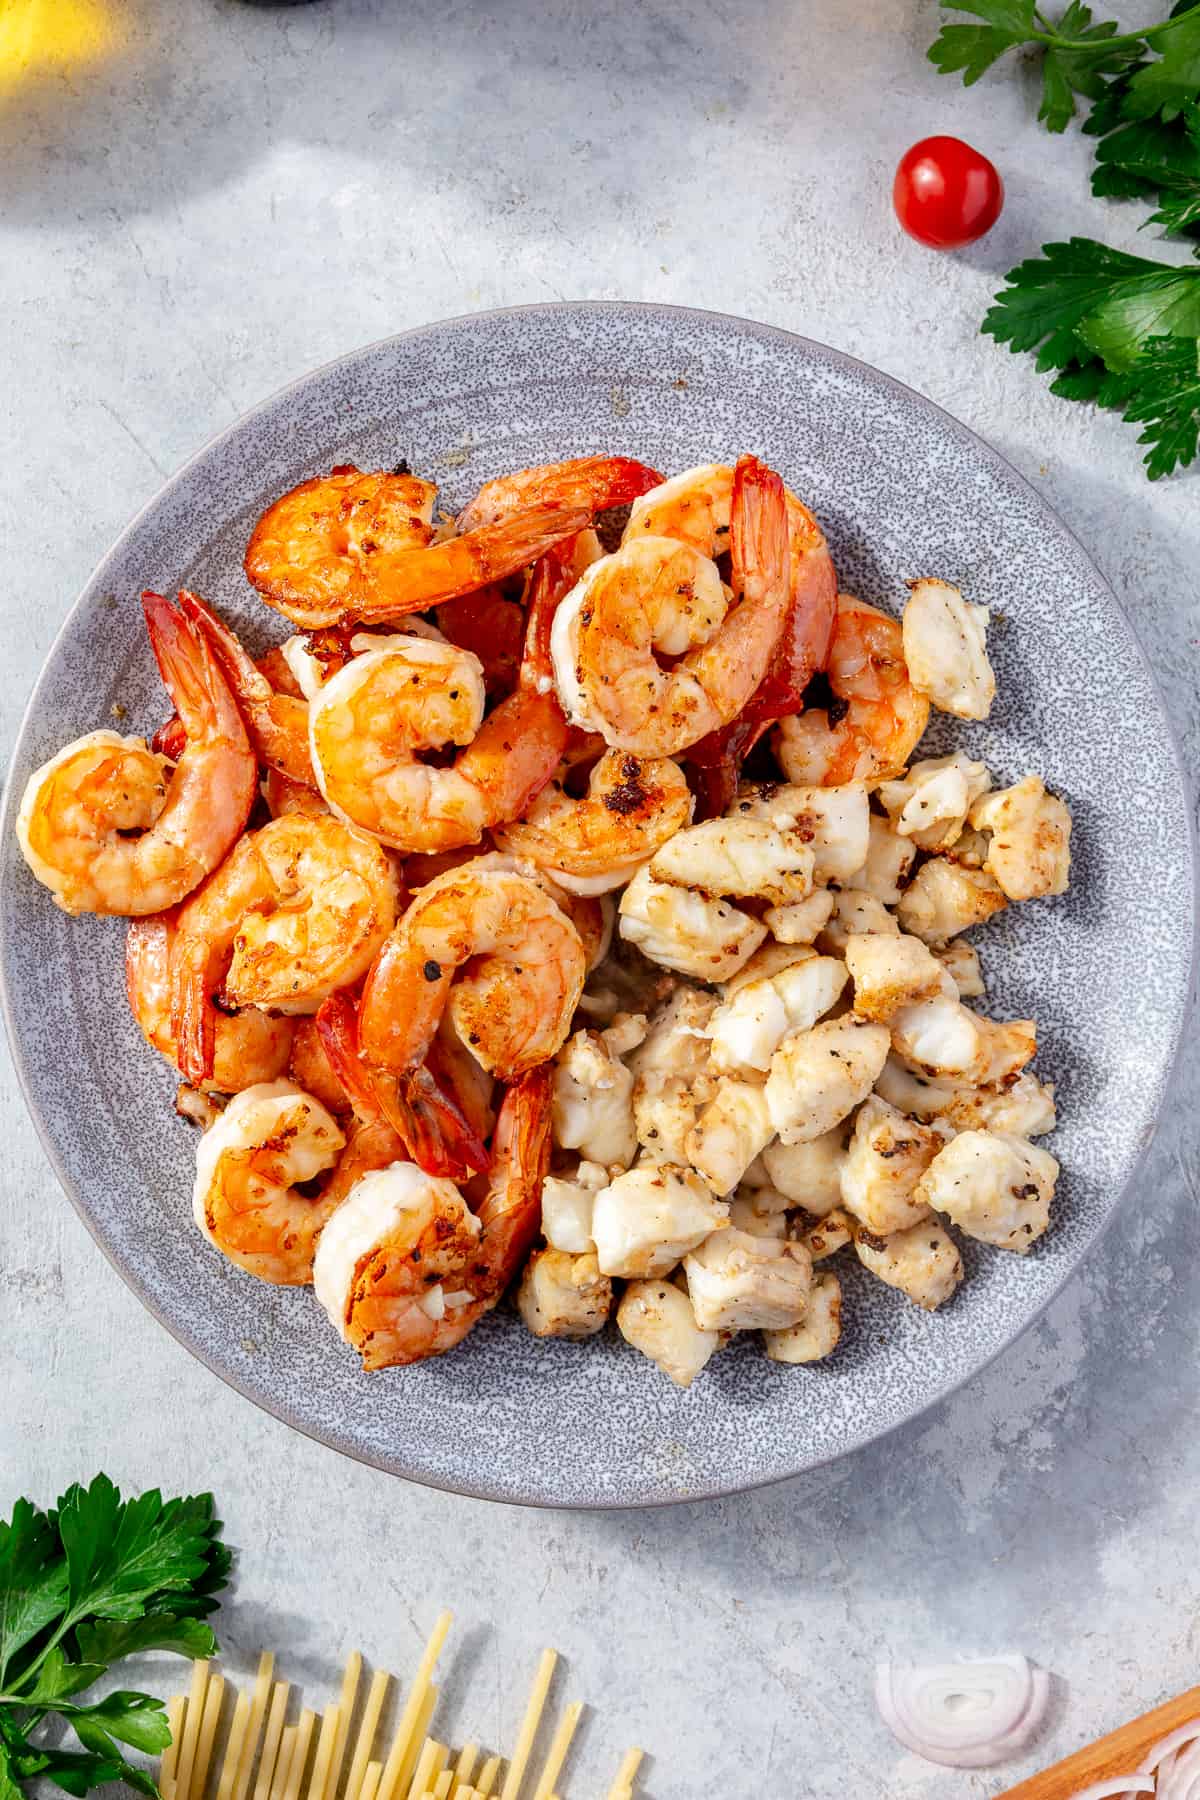 Cooked shrimp and halibut  on a light blue plate.